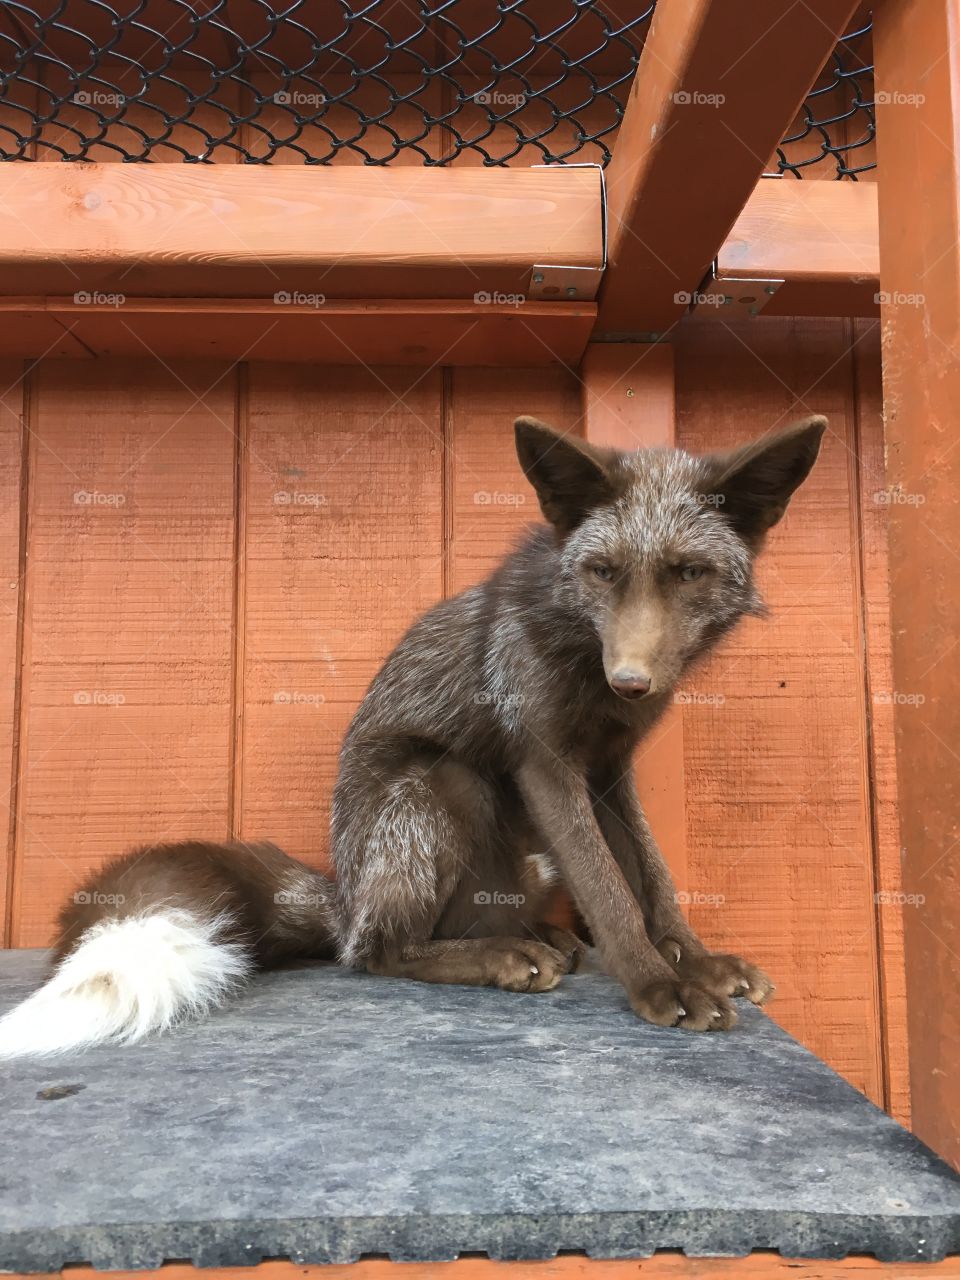 This is a designer fox, they are breed and slaughtered for their fur. This multi coloured one is going to live out the rest of his life (with the rest of his litter) at an animal sanctuary.